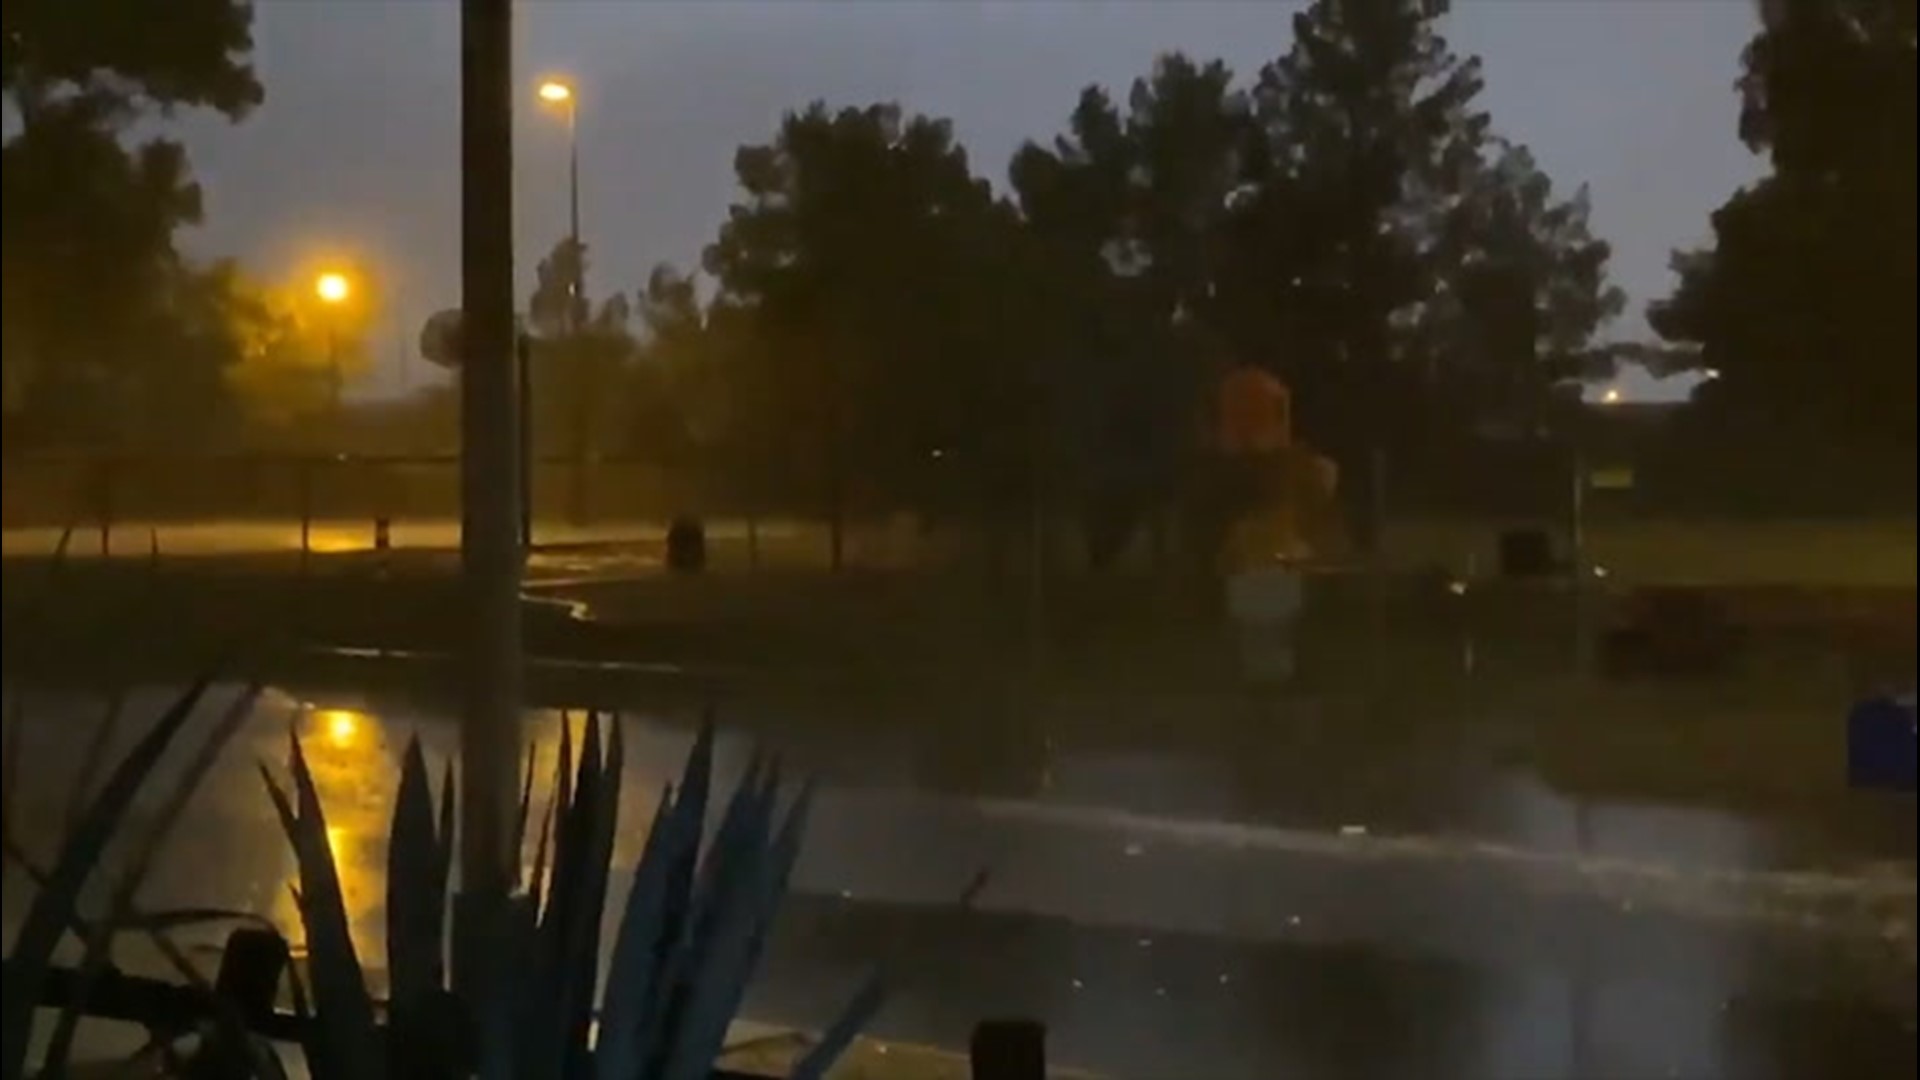 A powerful storm slammed into Tucson, Arizona, releasing thunder and lightning over the city on July 11.